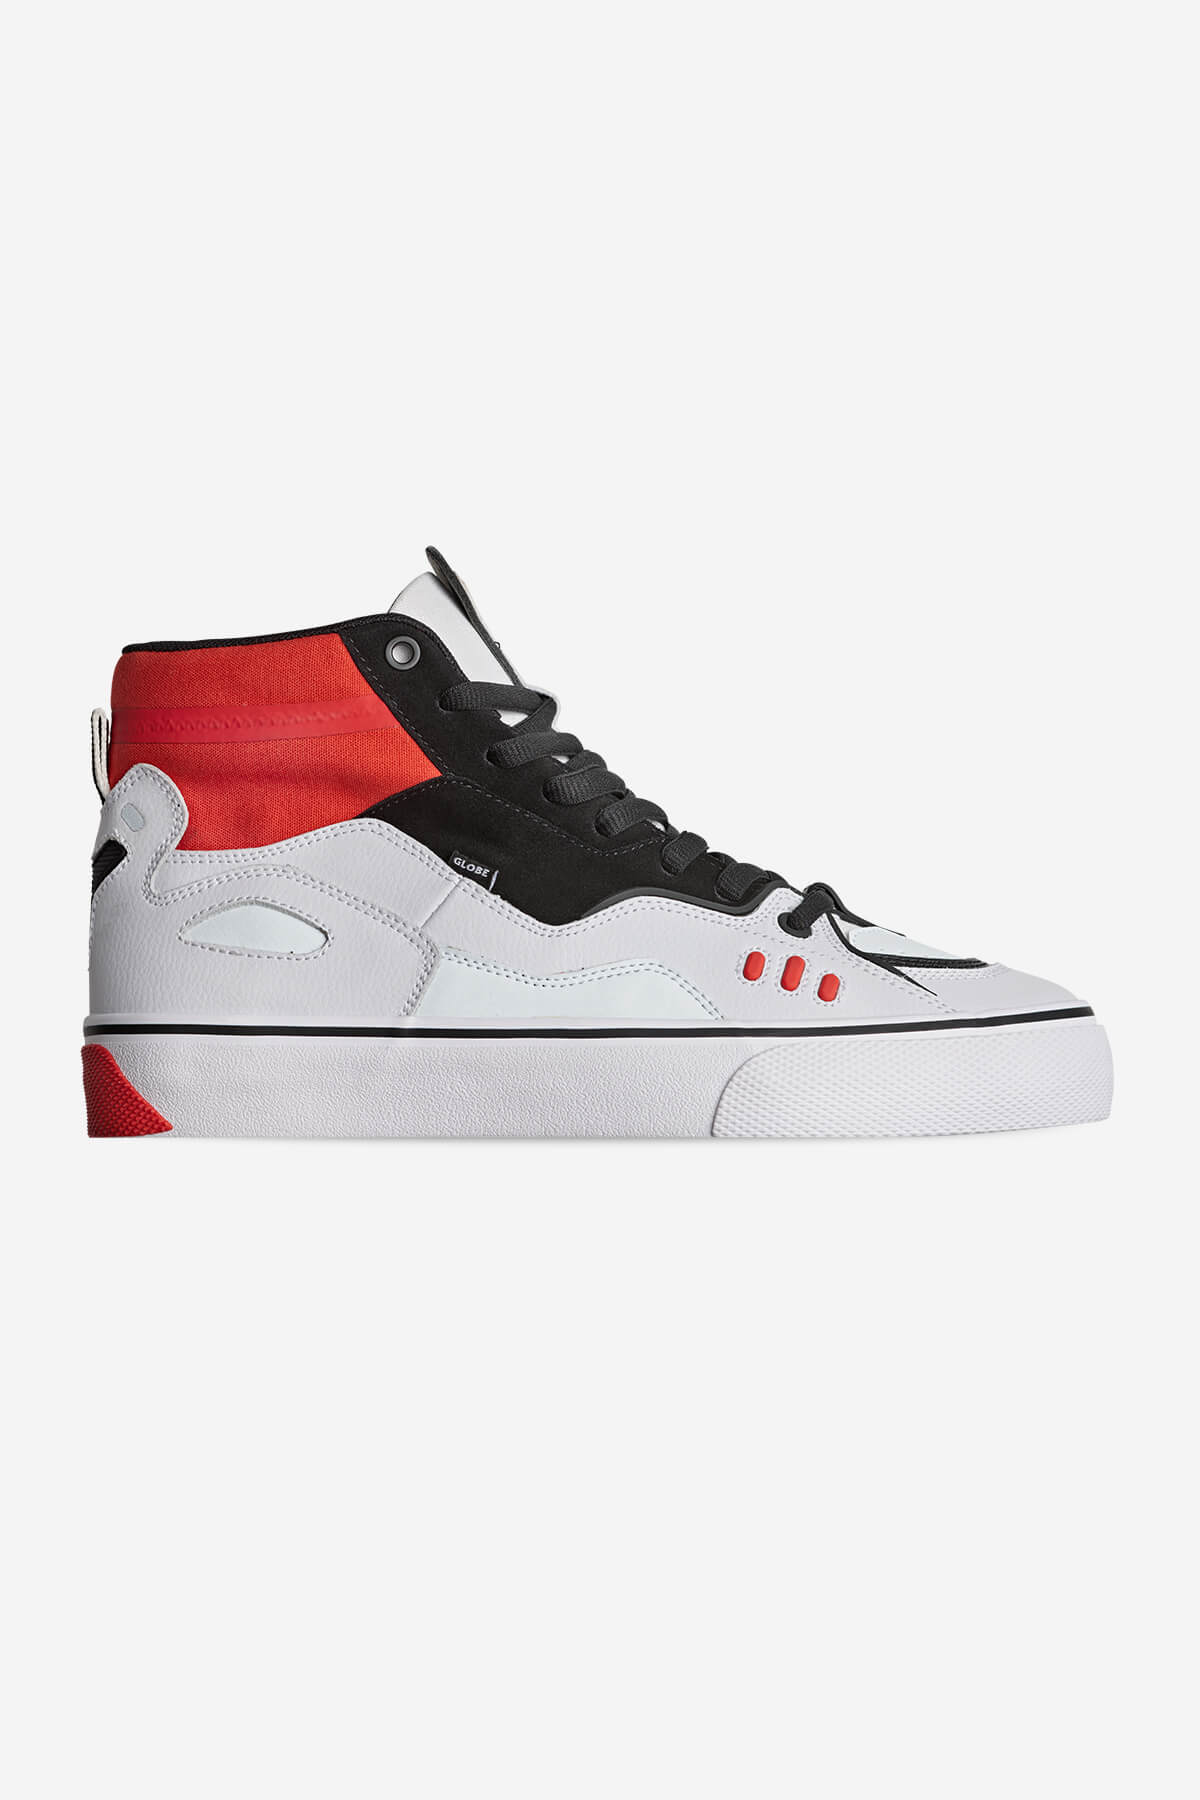 Globe Mid shoes Dimension - White/Black/Red in White/Black/Red